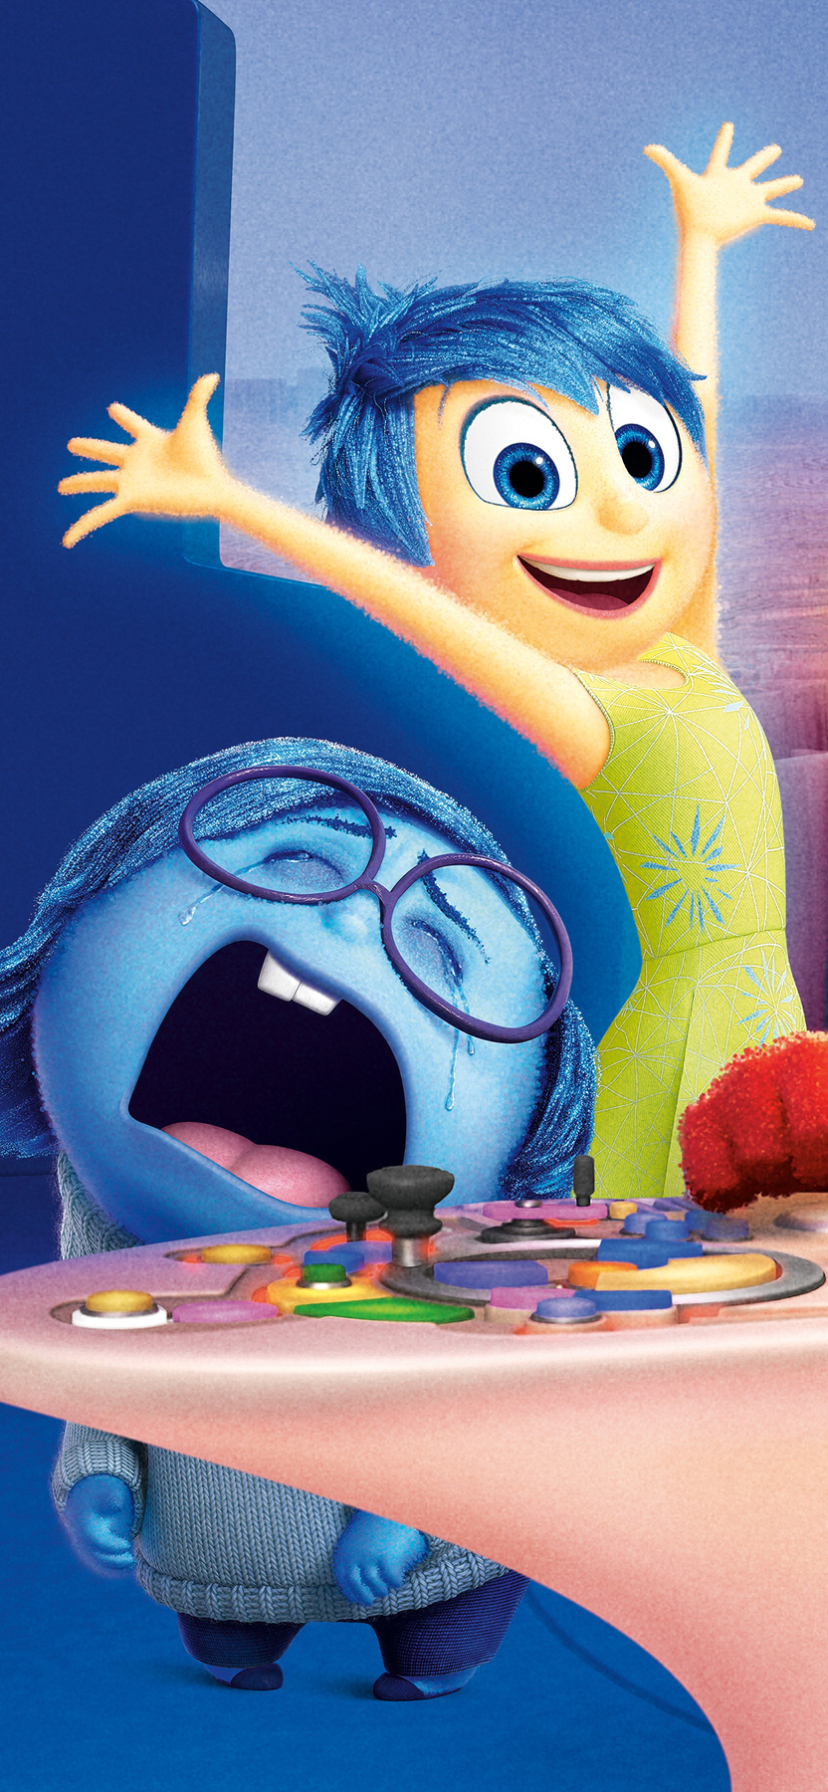 Sadness (Inside Out) Phone Wallpaper